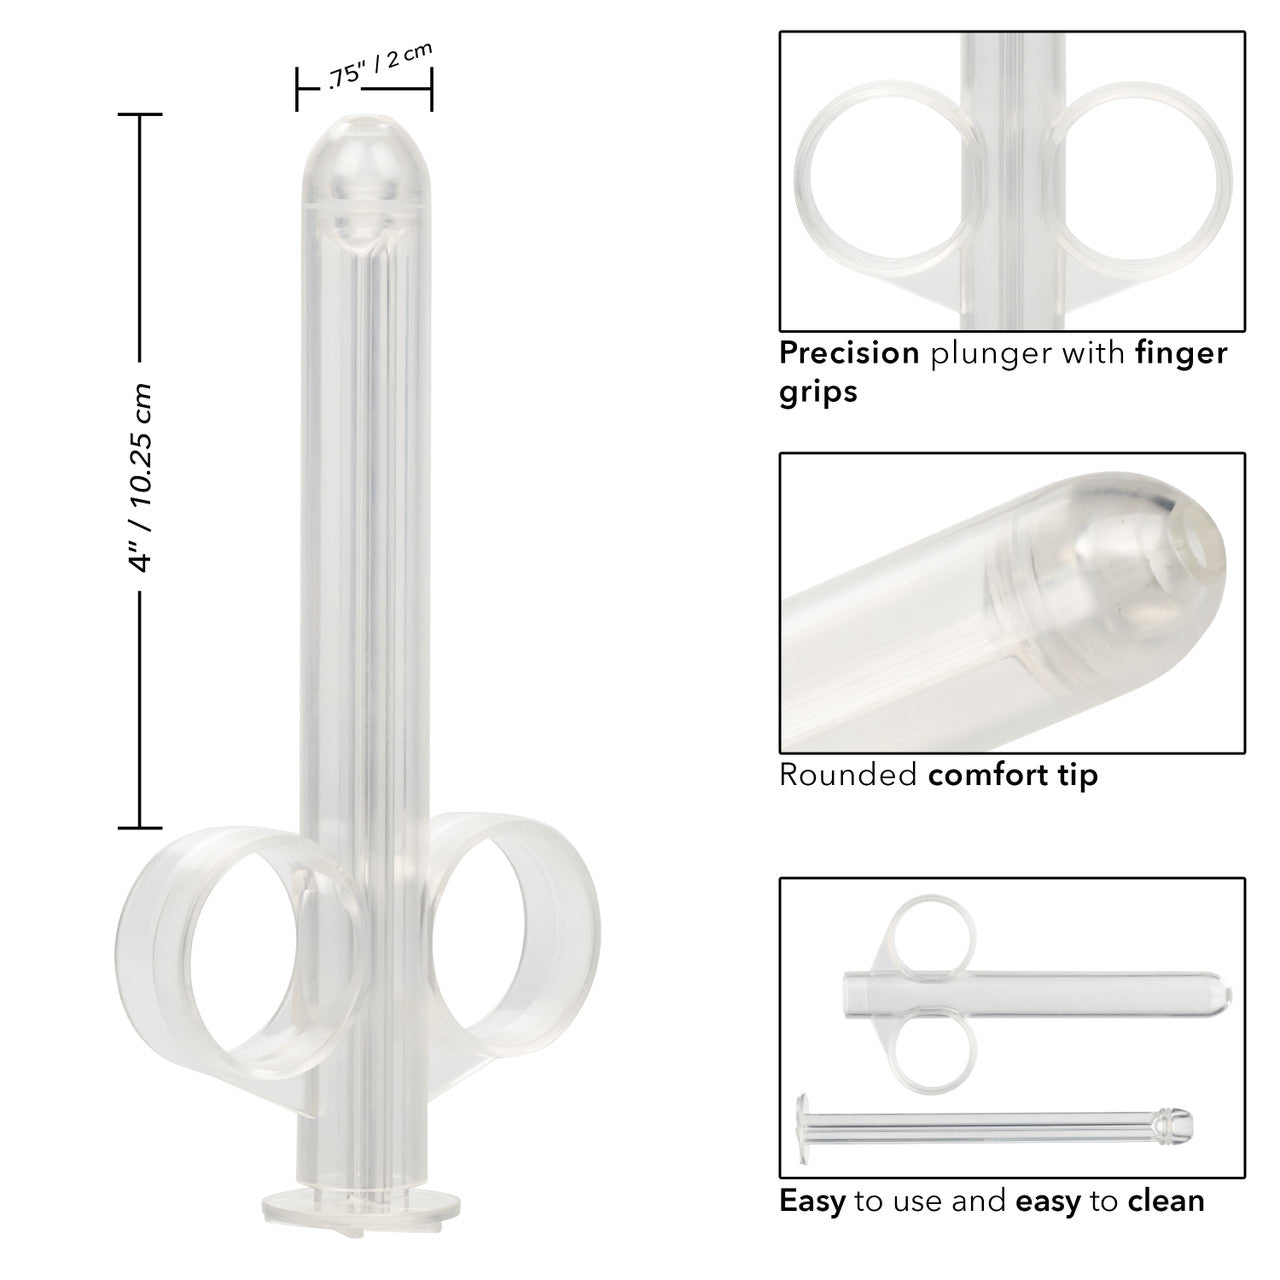 XL Lube Tube Applicator - Clear - Thorn & Feather